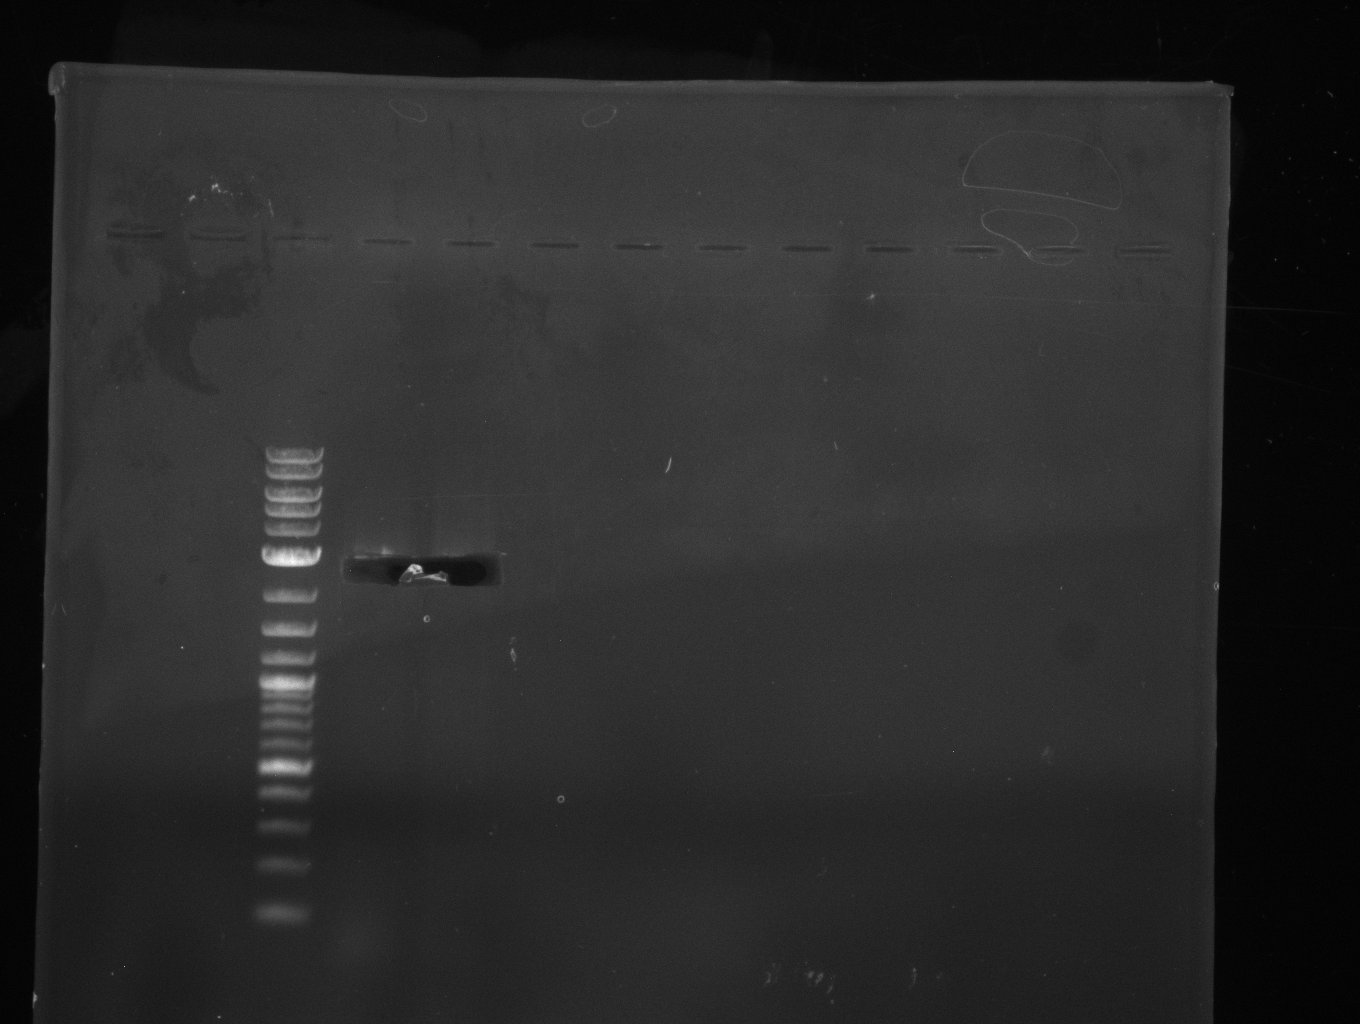 Bands cut out of PCR (amplification of pSB1C3)